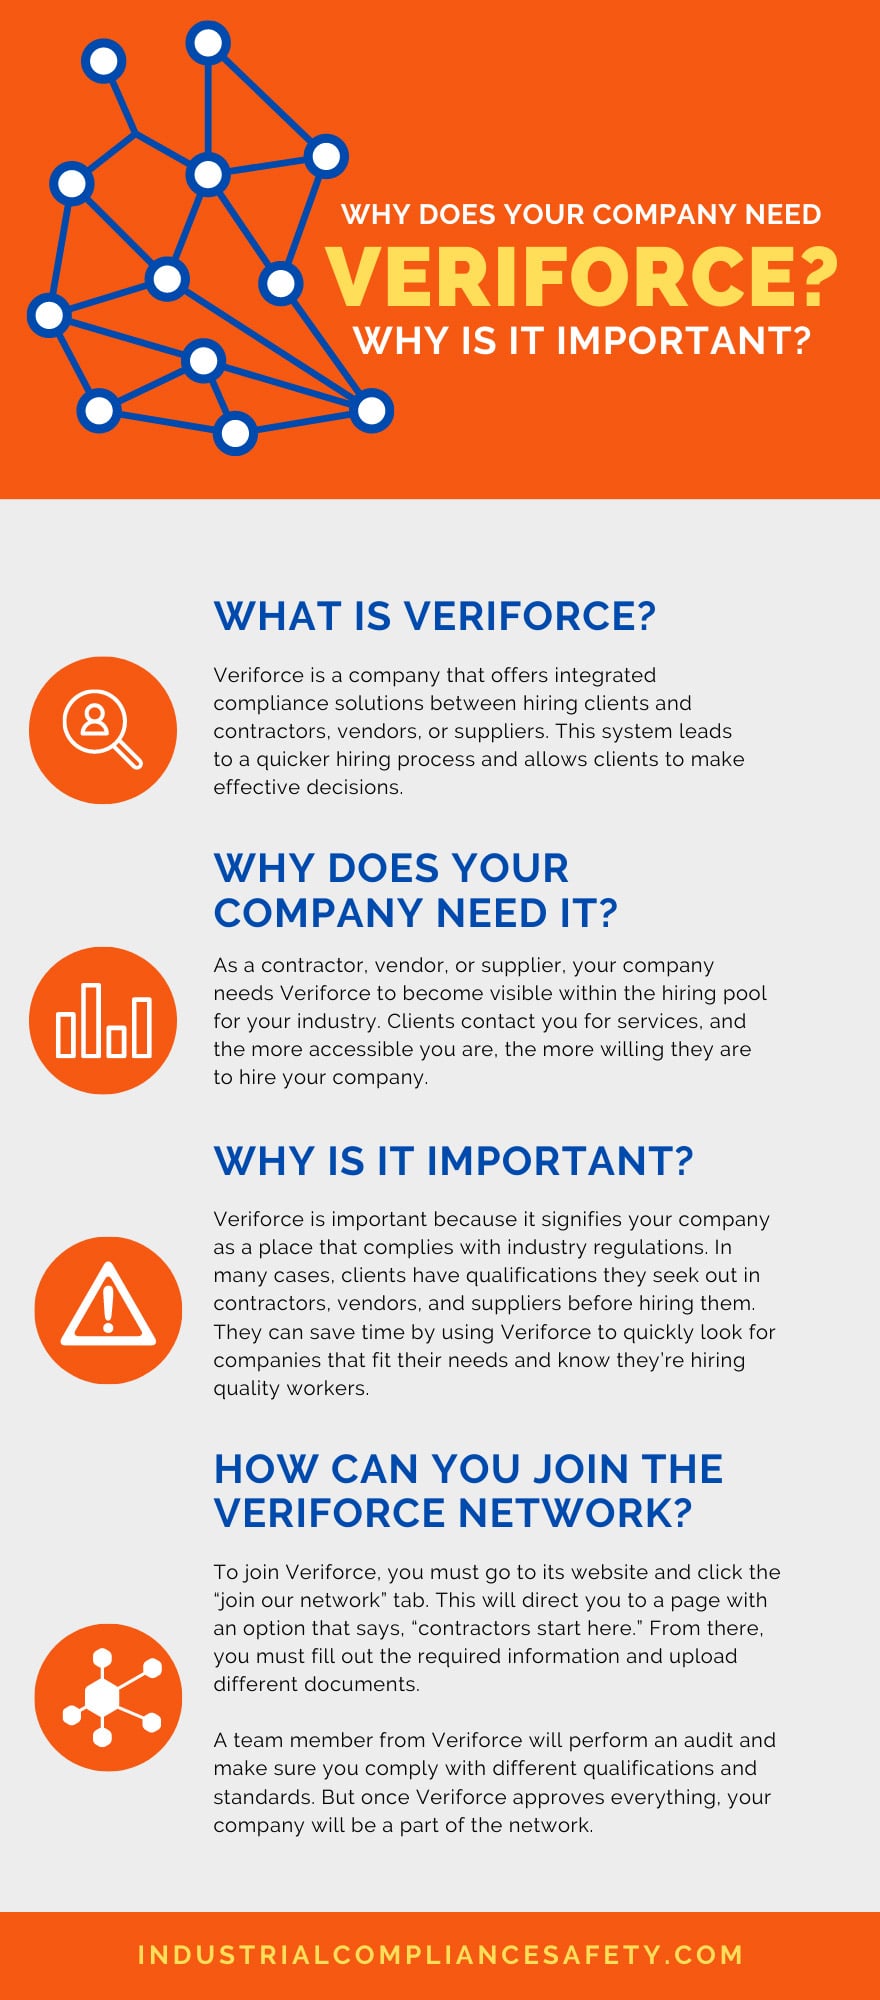 Why Does Your Company Need Veriforce? Why Is It Important?